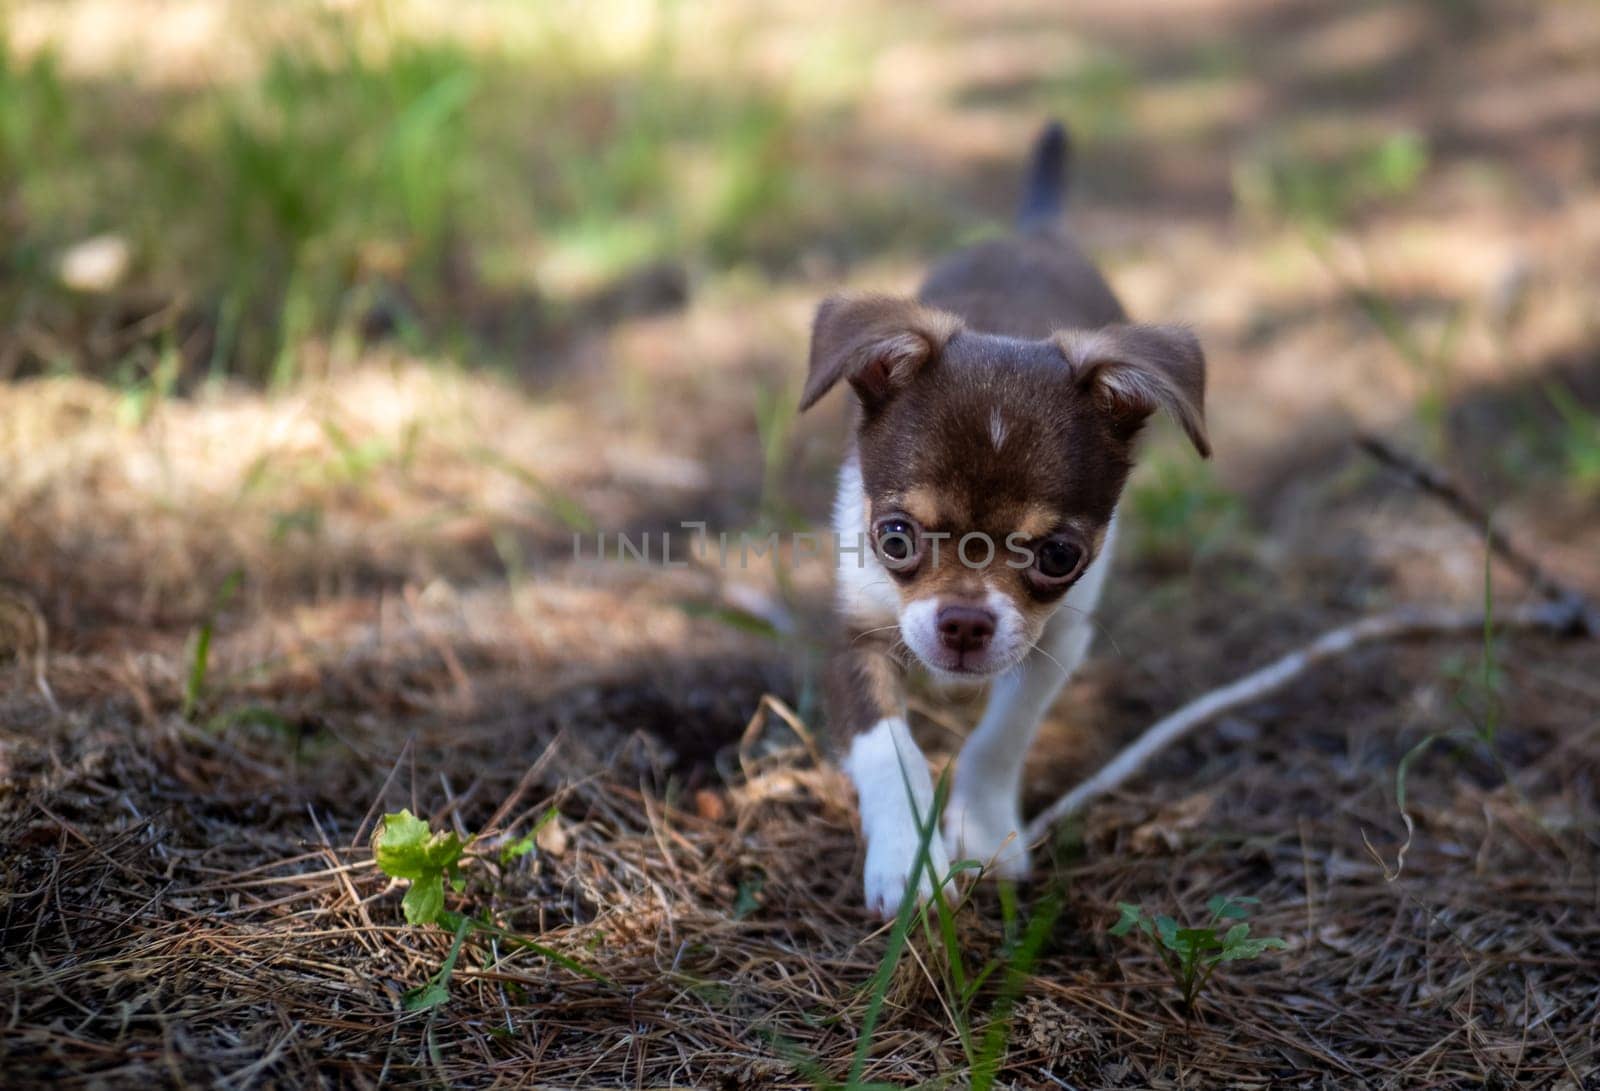 A curious Chihuahua puppy explores the forest floor, displaying an eagerness to discover the world around it.